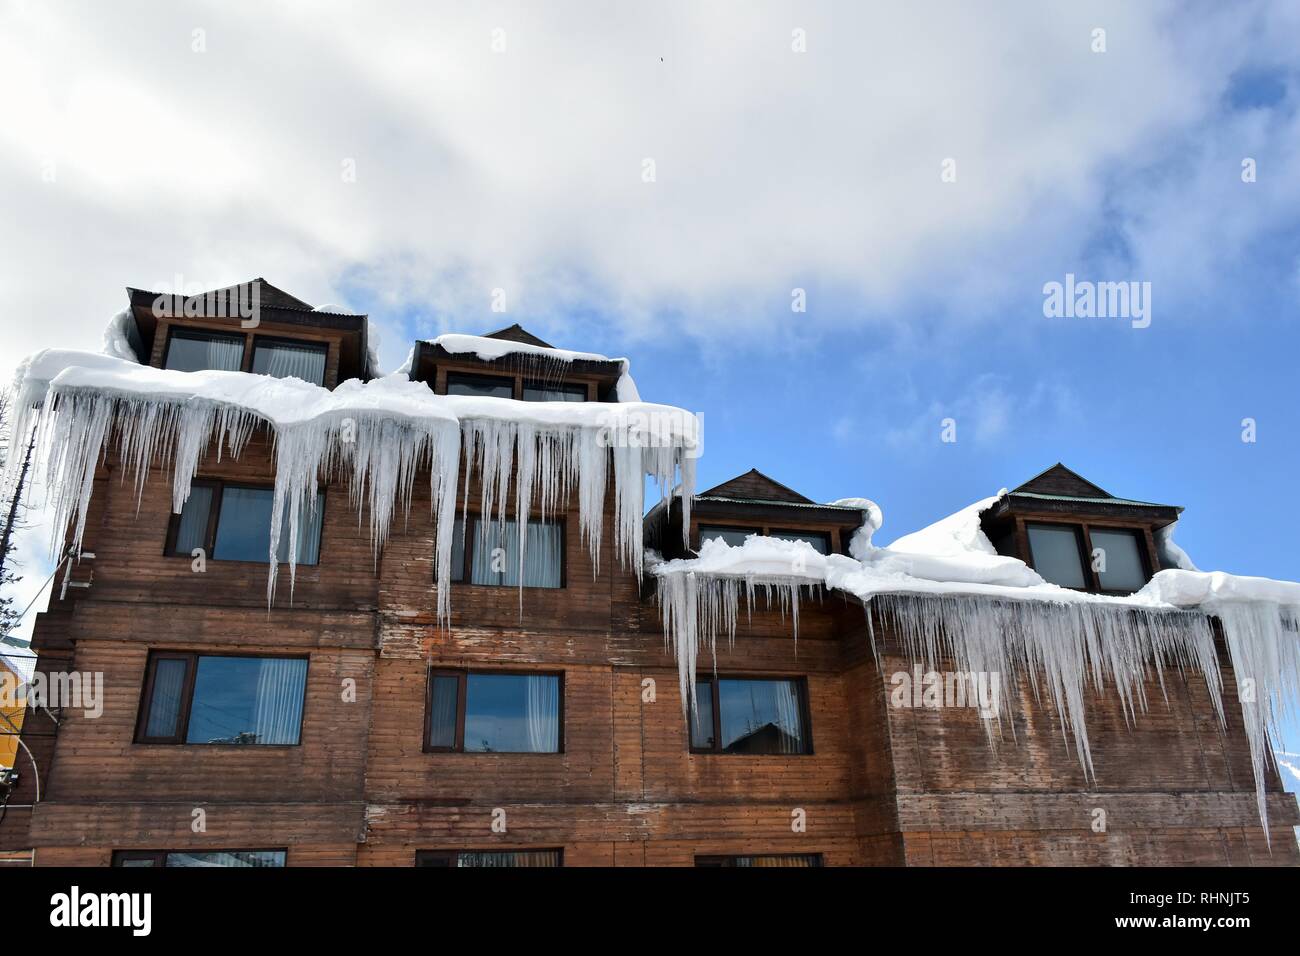 February 3, 2019 - Gulmarg, J&K, India - Icicles seen hanging from a roof  top of the hotel at a famous ski resort in Gulmarg, about 55kms from  Srinagar, Indian administered Kashmir.